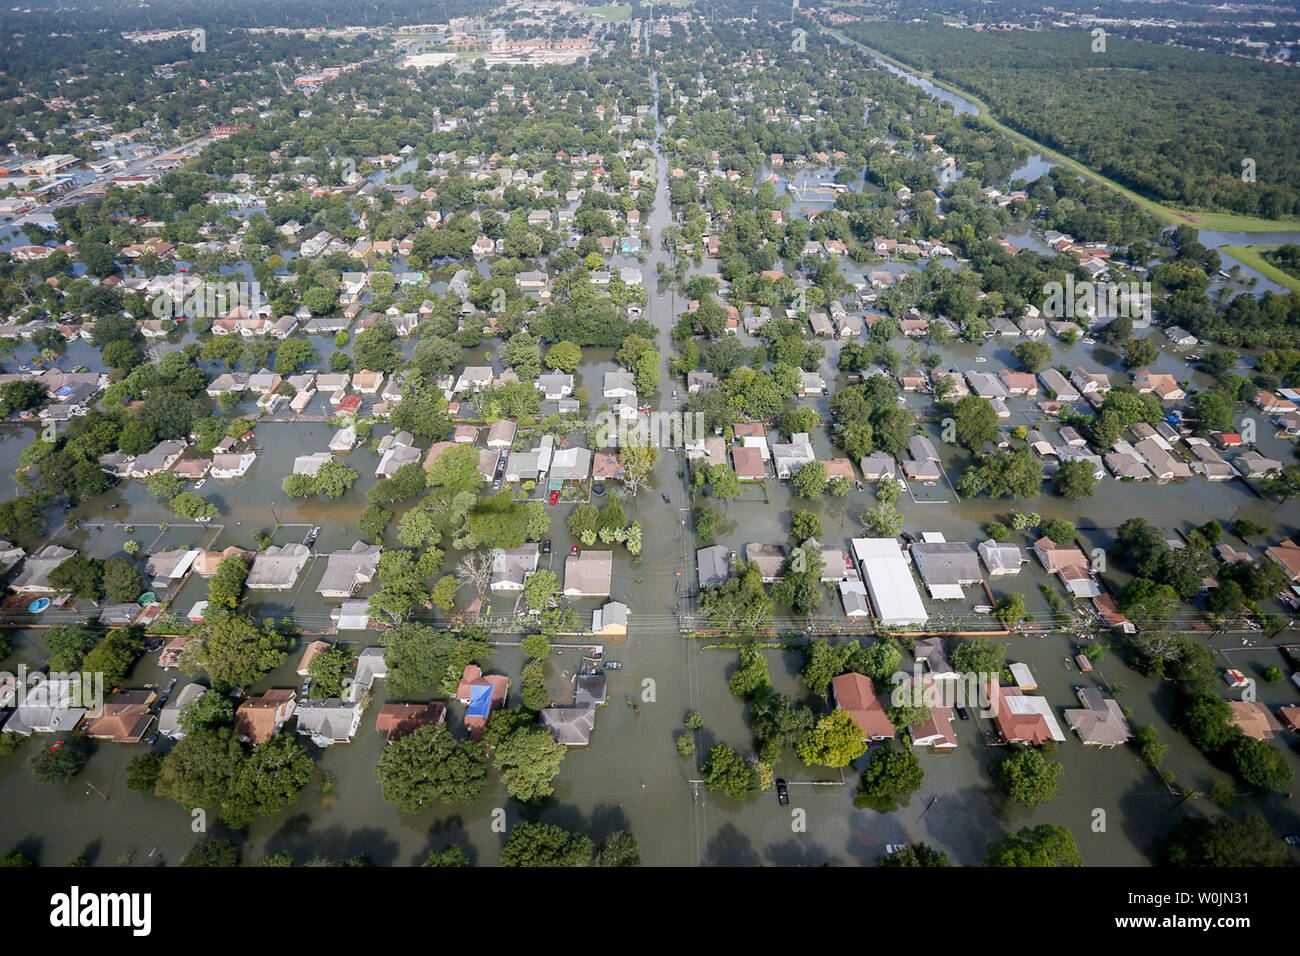 Flooding caused by Hurricane Harvey is seen in Southeast Texas on August 31, 2017. Harvey made landfall into the Texas coast last week as a category 4 hurricane. Photo by Staff Sgt. Daniel J. Martinez/Air National Guard/UPI Stock Photo